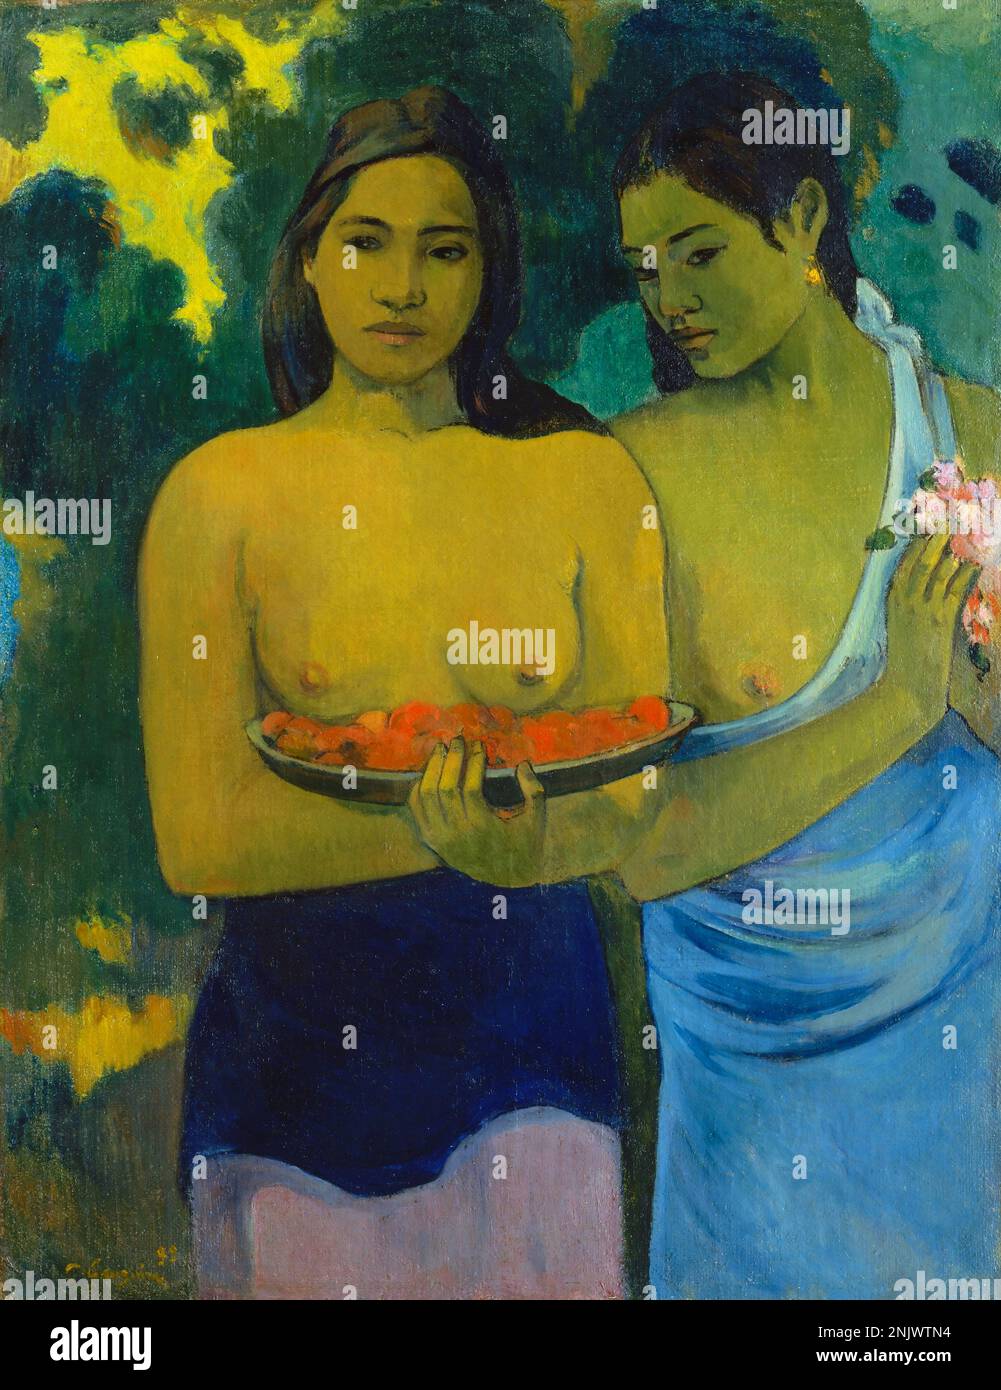 Tahiti: 'Deux Tahitiennes Aux Fleurs de Mangue' (Two Tahitian Women). Oil on canvas painting by Paul Gauguin (7 June 1848 - 8 May 1903), 1899.  'Two Tahitian Women' is an 1899 painting by Paul Gauguin. The painting depicts two topless women, one holding mango blossoms, on the Pacific Island of Tahiti.  Paul Gauguin was born in Paris in 1848 and spent some of his childhood in Peru. He worked as a stockbroker with little success, and suffered from bouts of severe depression. He also painted. Stock Photo